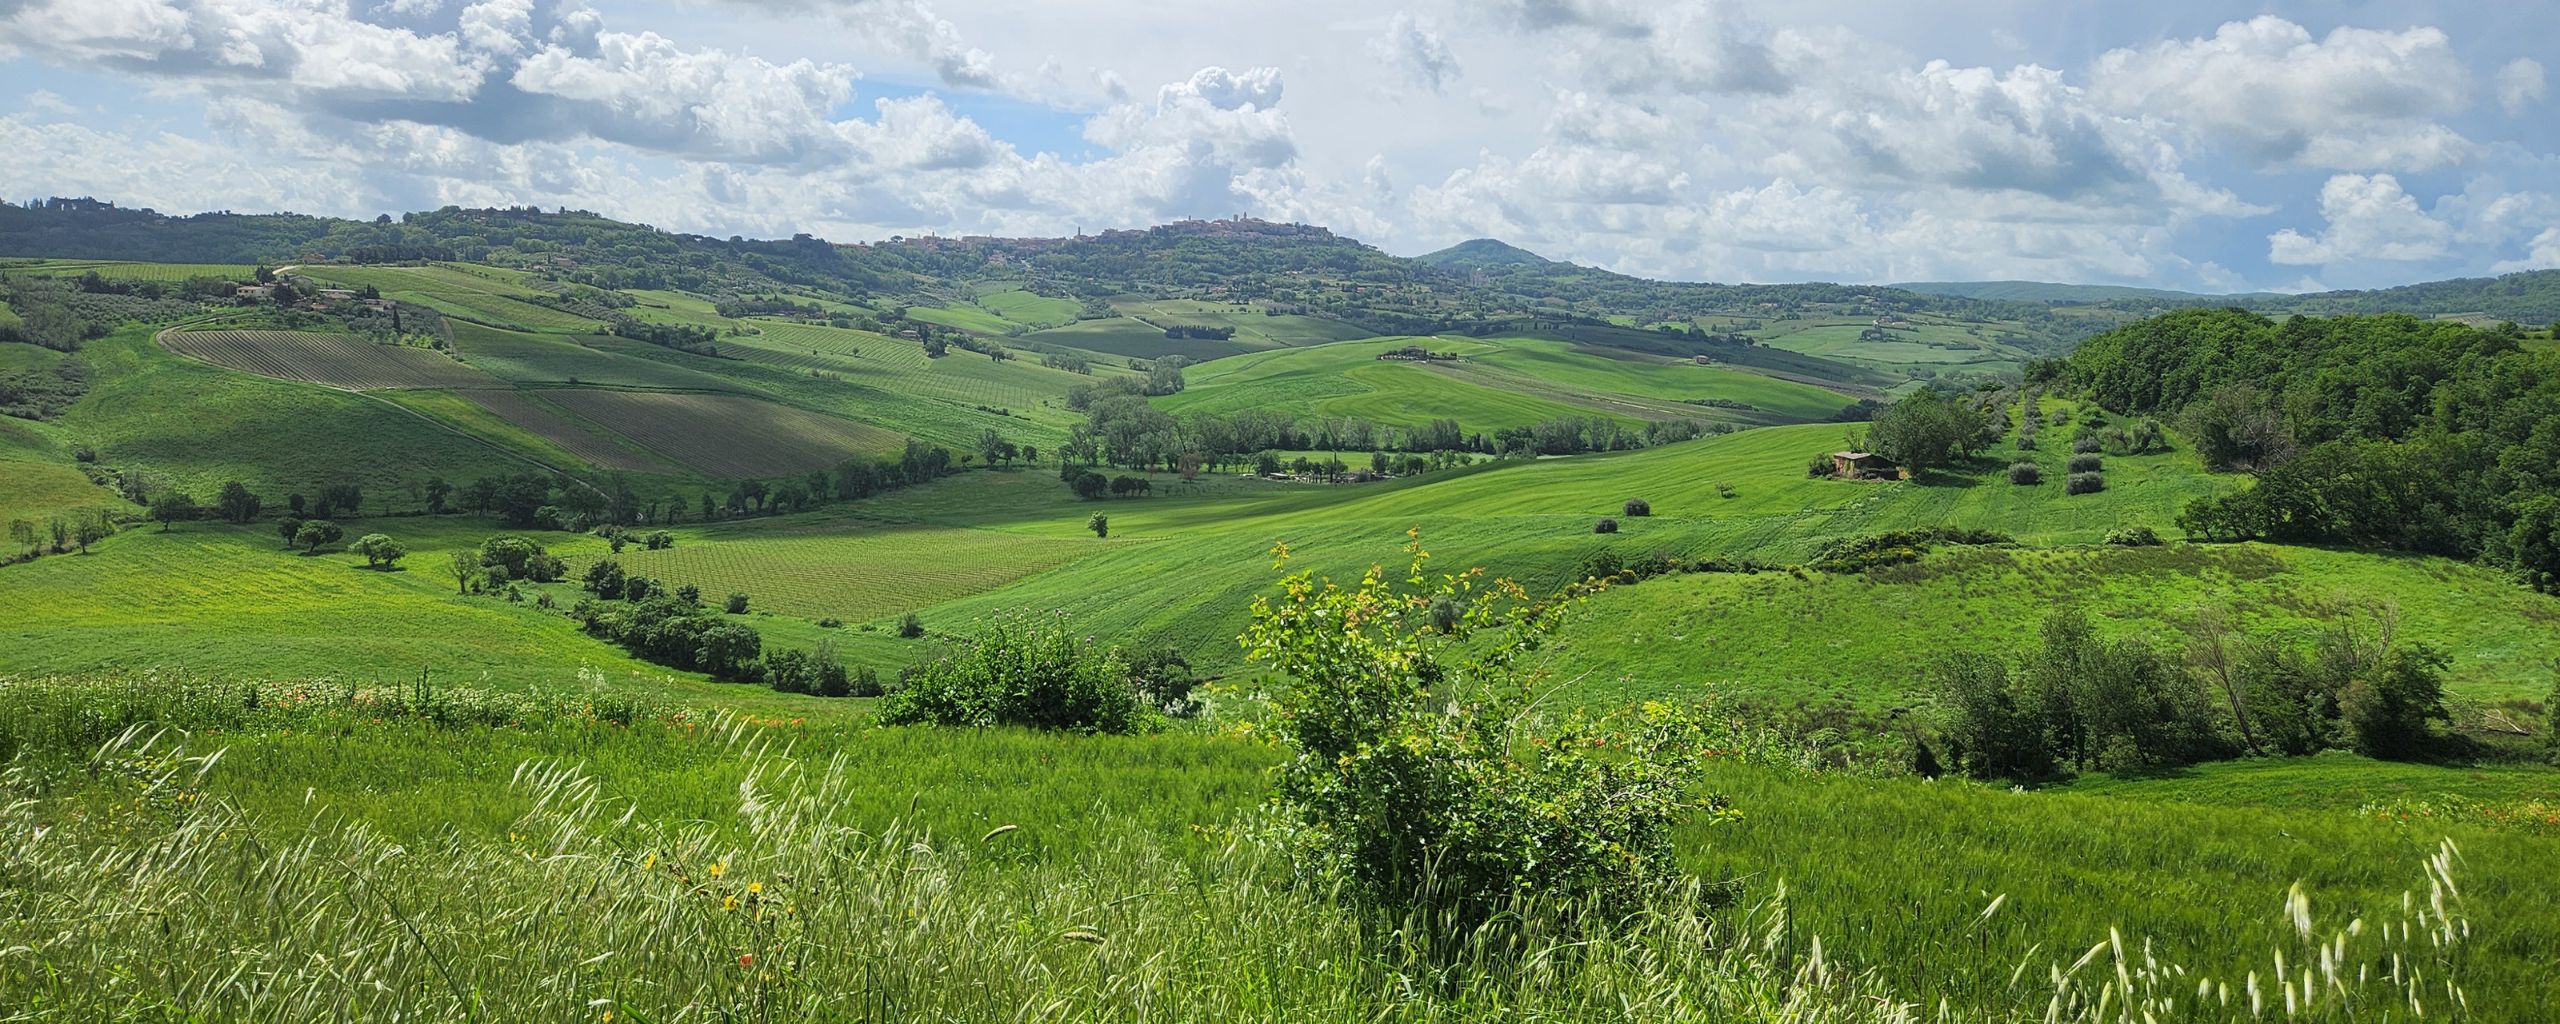 The rolling verdant hills of Tuscany make for excellent cycling